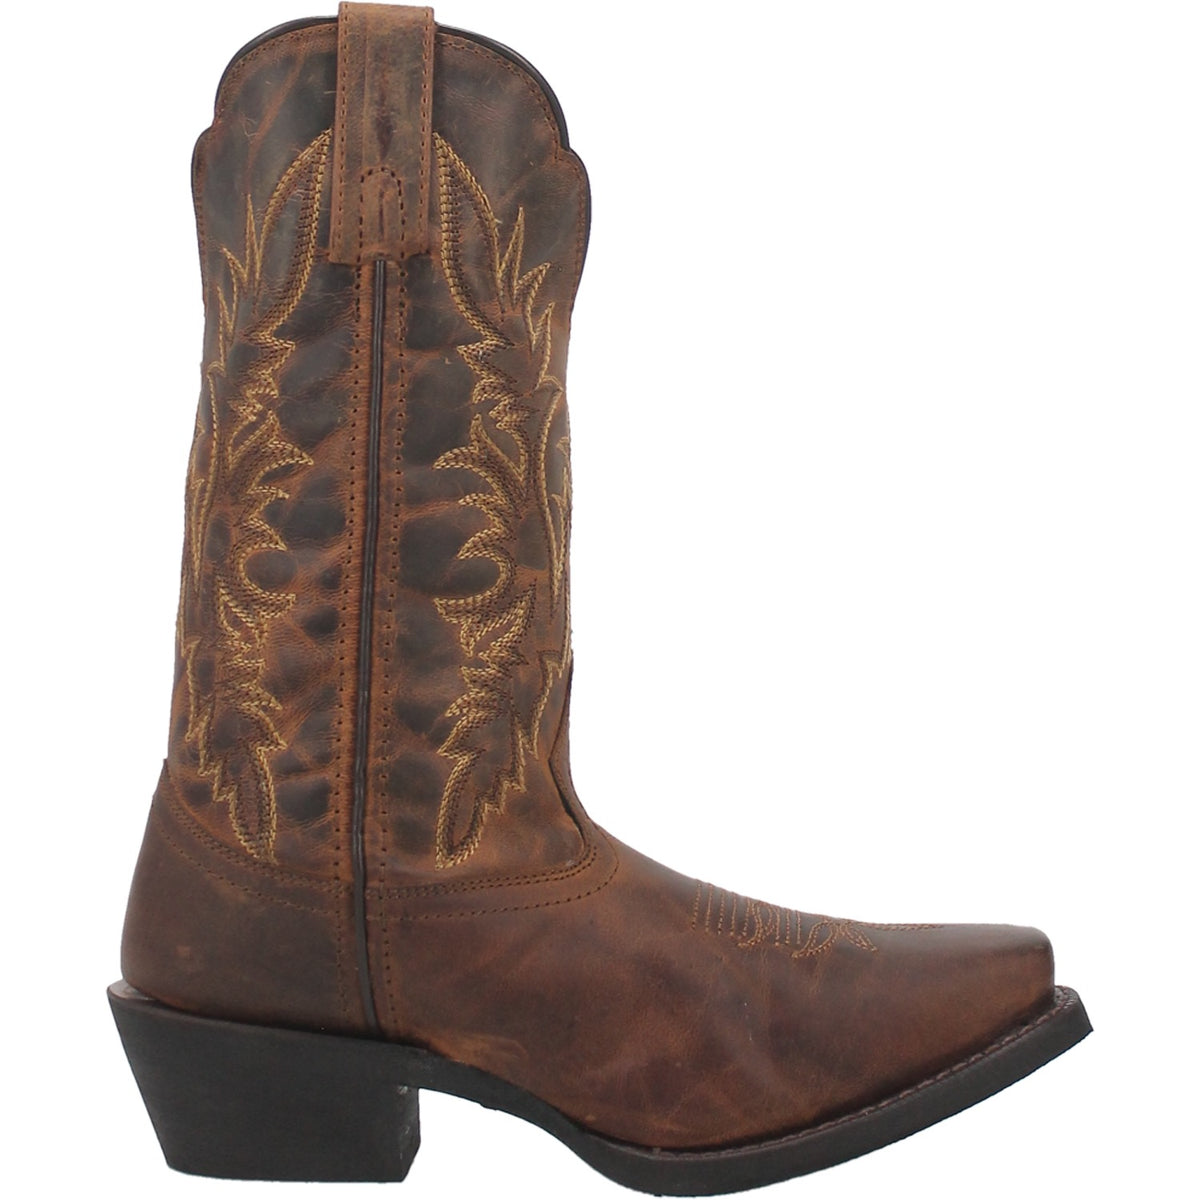 MALINDA LEATHER BOOT Cover